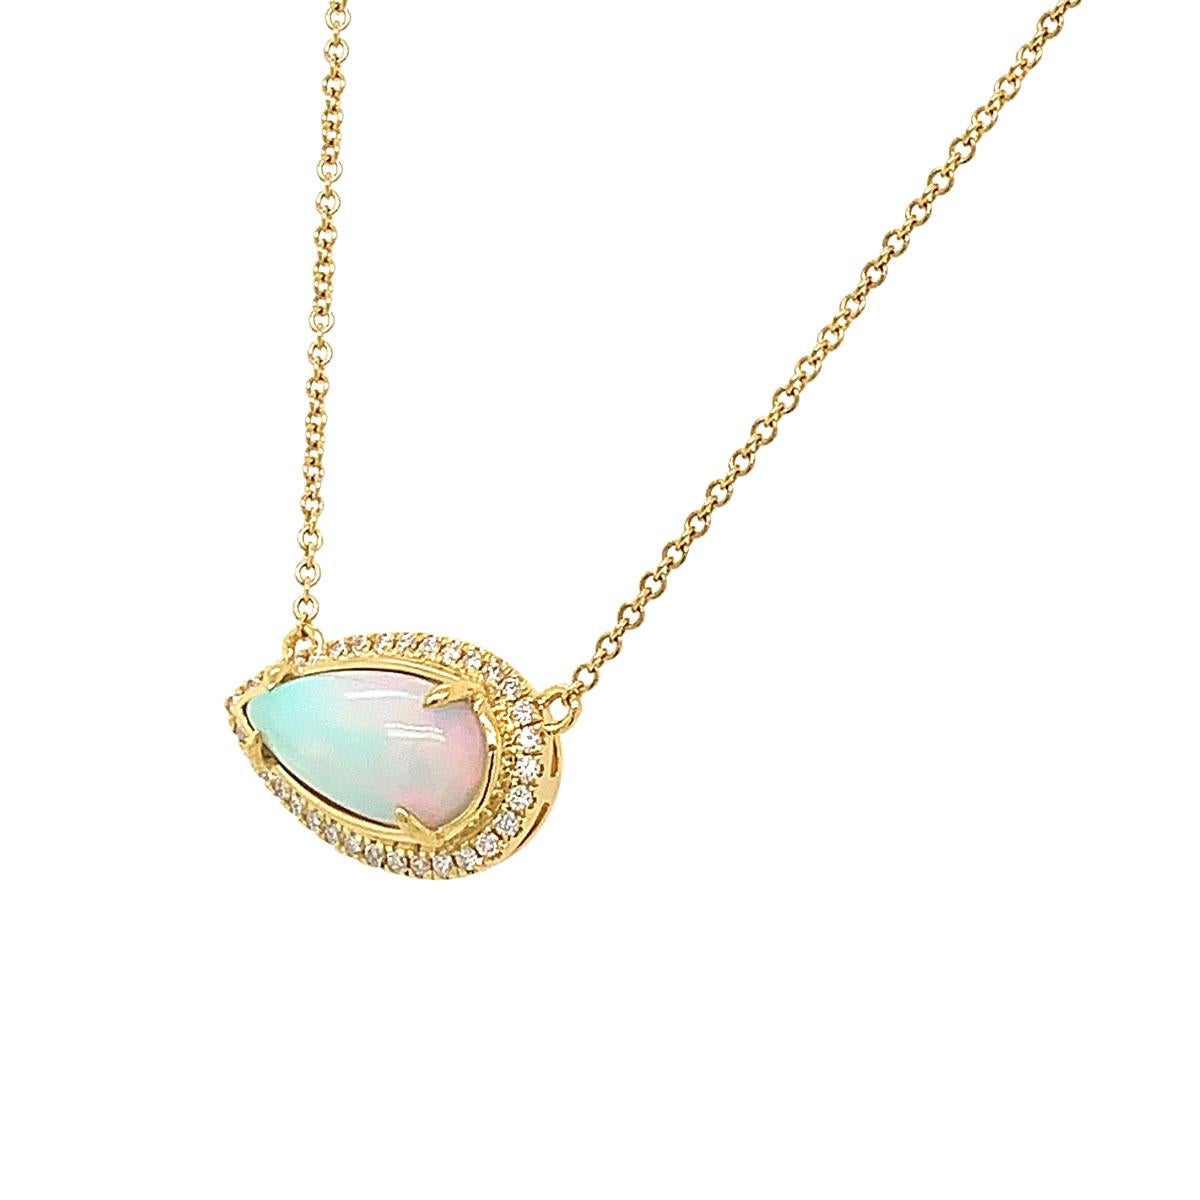 This colorful opal and diamonds Necklace features a Pear Shape opal framed by a halo Micro prong round brilliant diamonds. 4 diamonds are bezel set along the chain in 18k yellow gold. Experience the Difference !

Product details: 

Center Gemstone